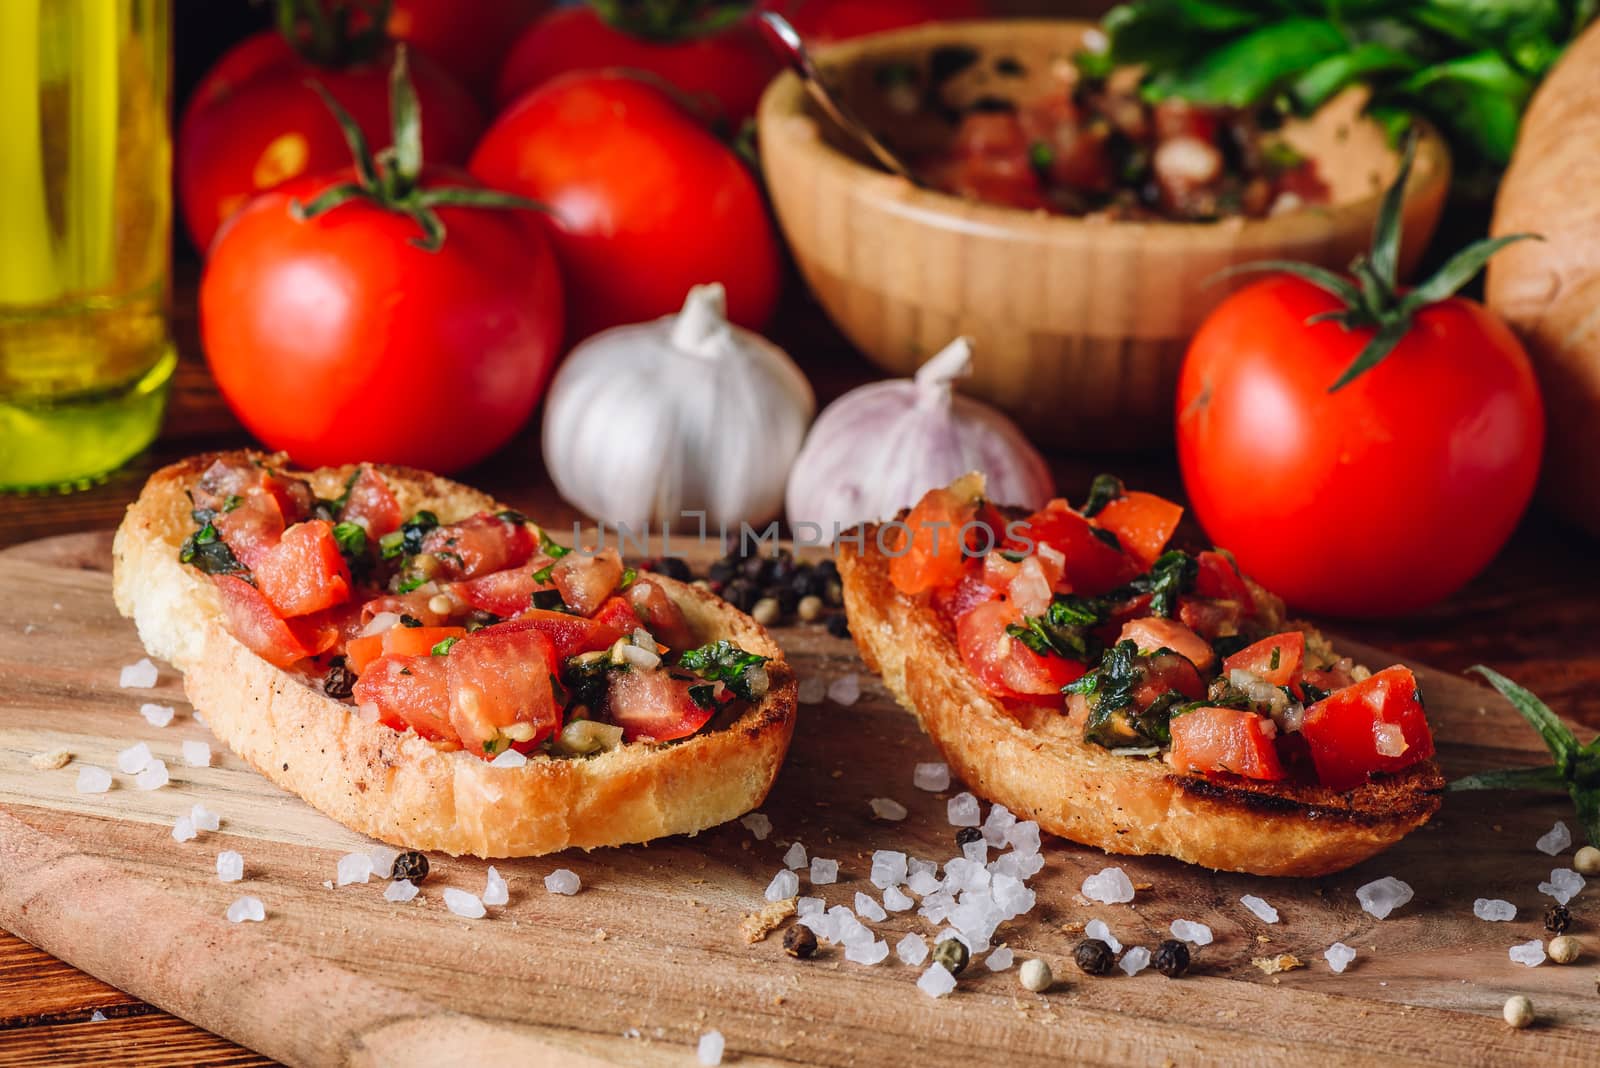 Two Bruschetta with Tomatoes by Seva_blsv